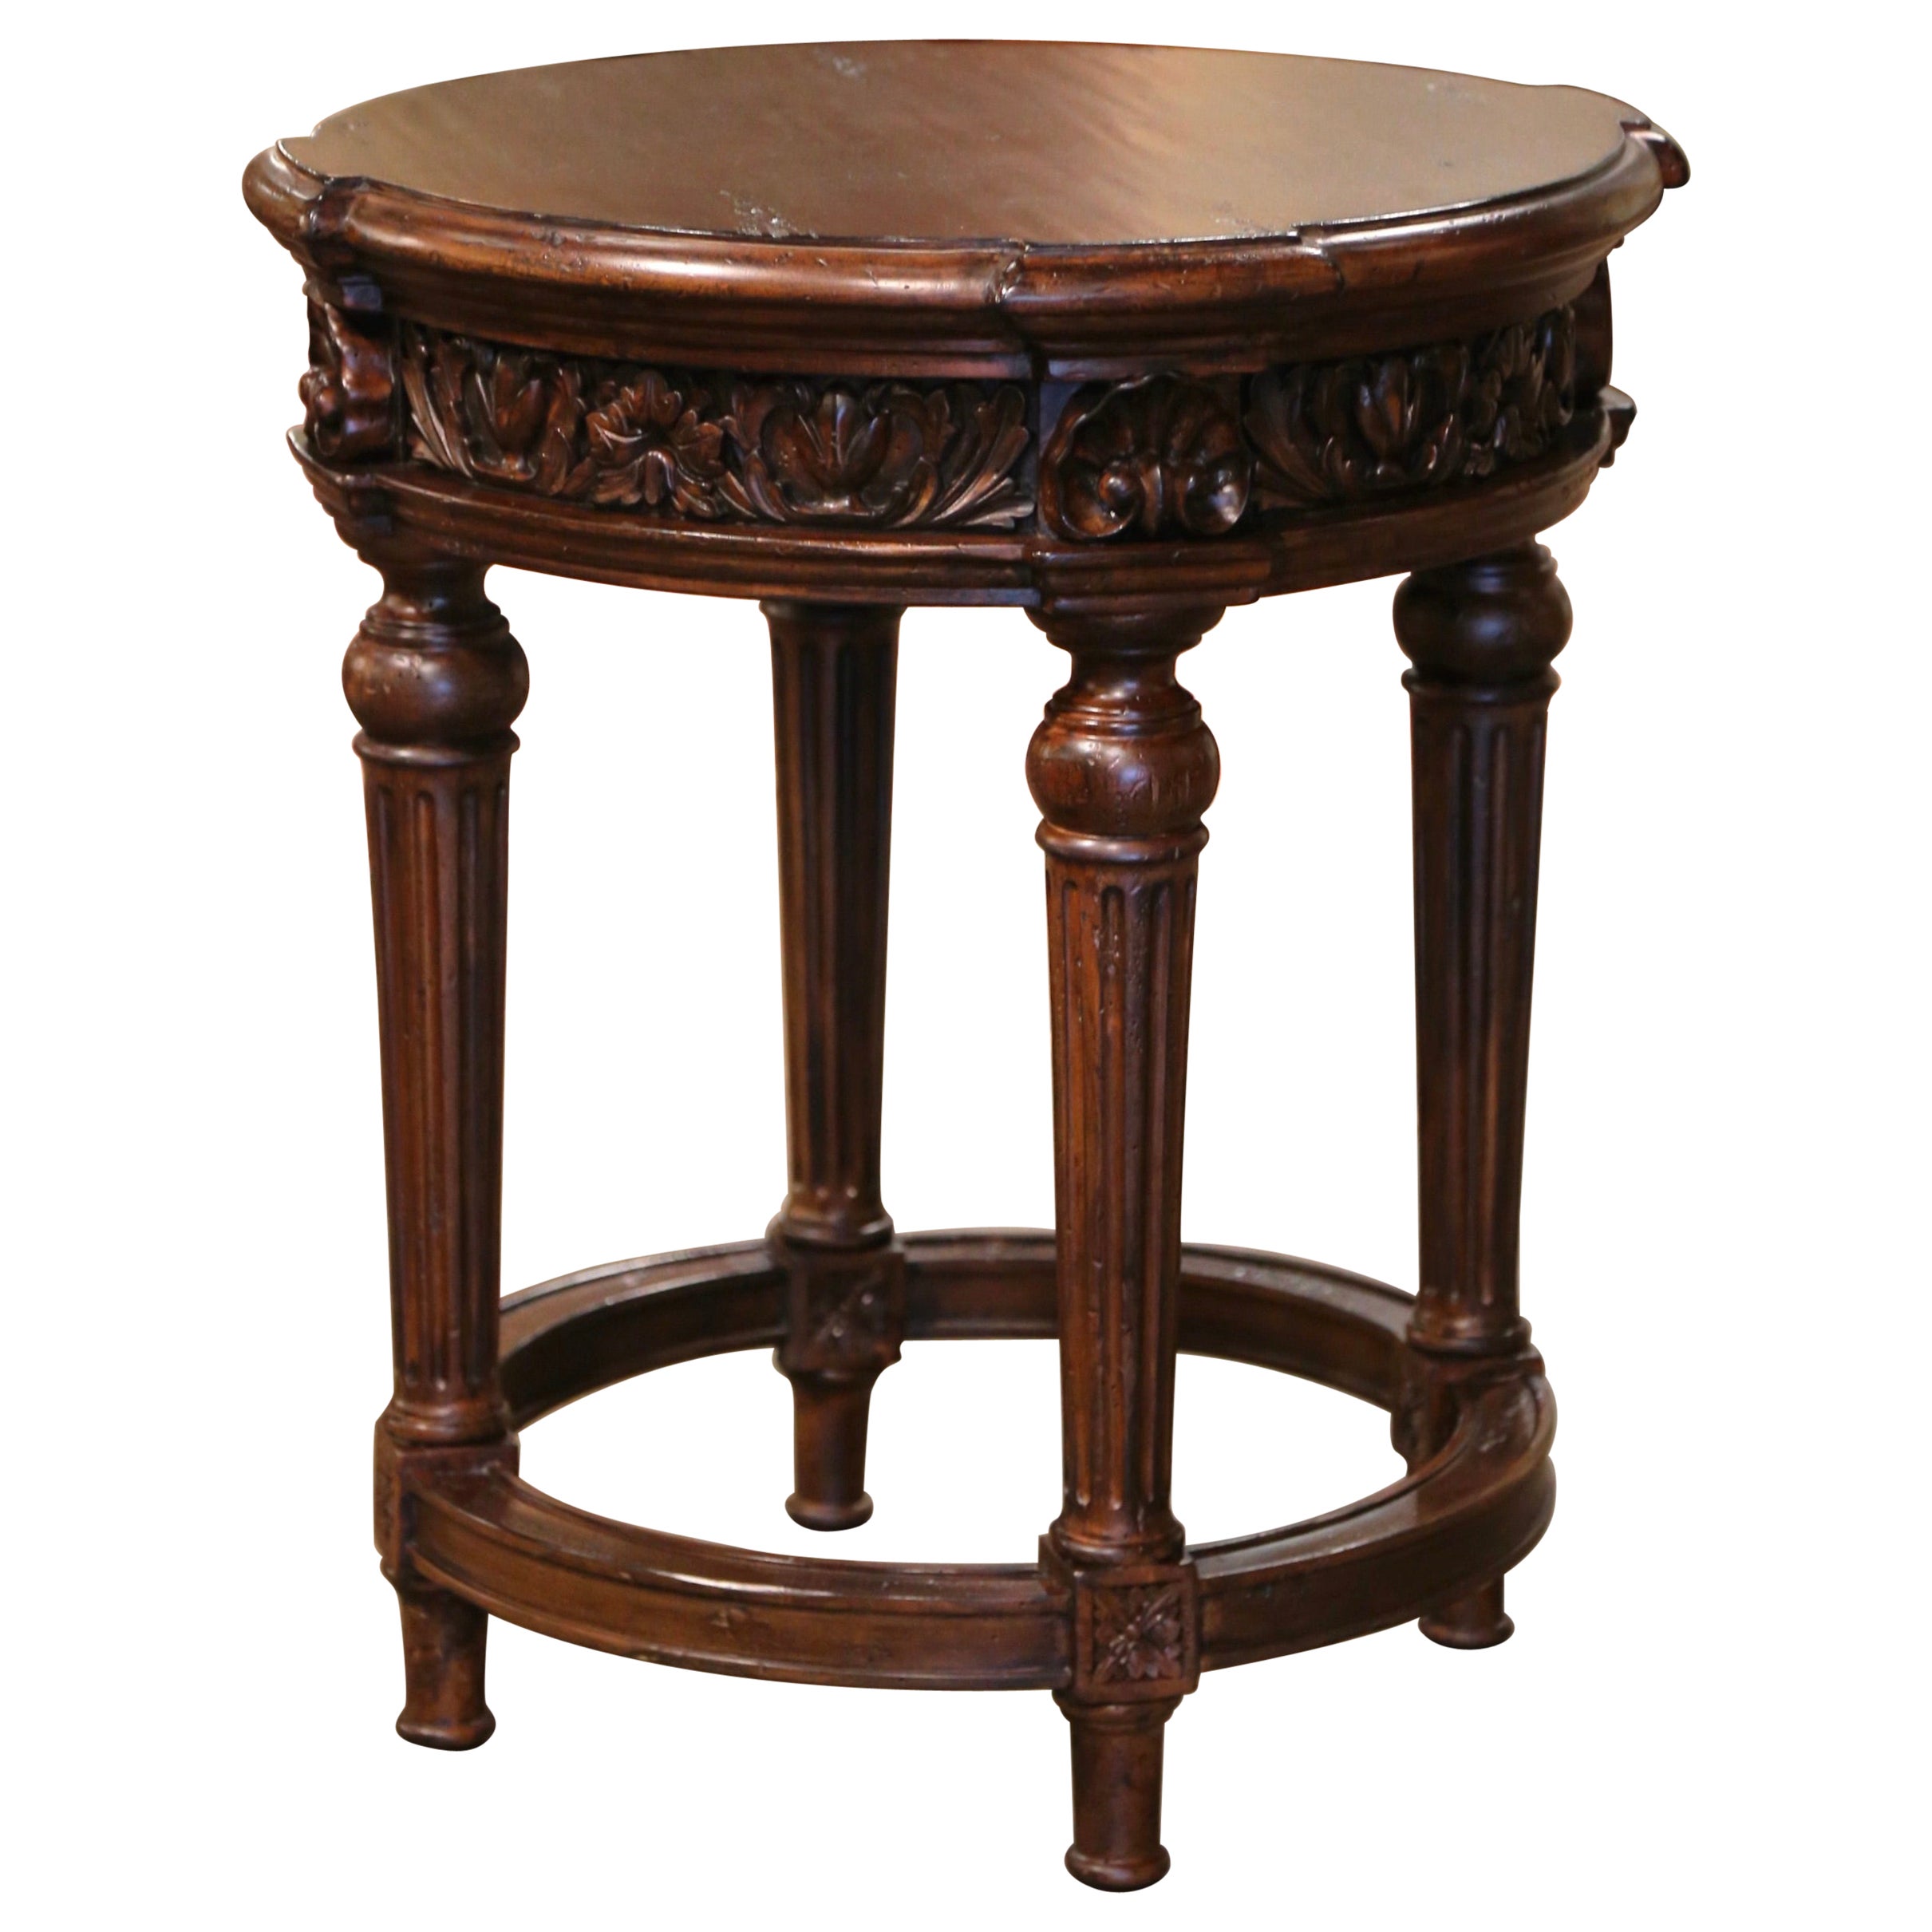 Vintage Louis XVI Style Carved Walnut Gueridon Side Table from Habersham For Sale